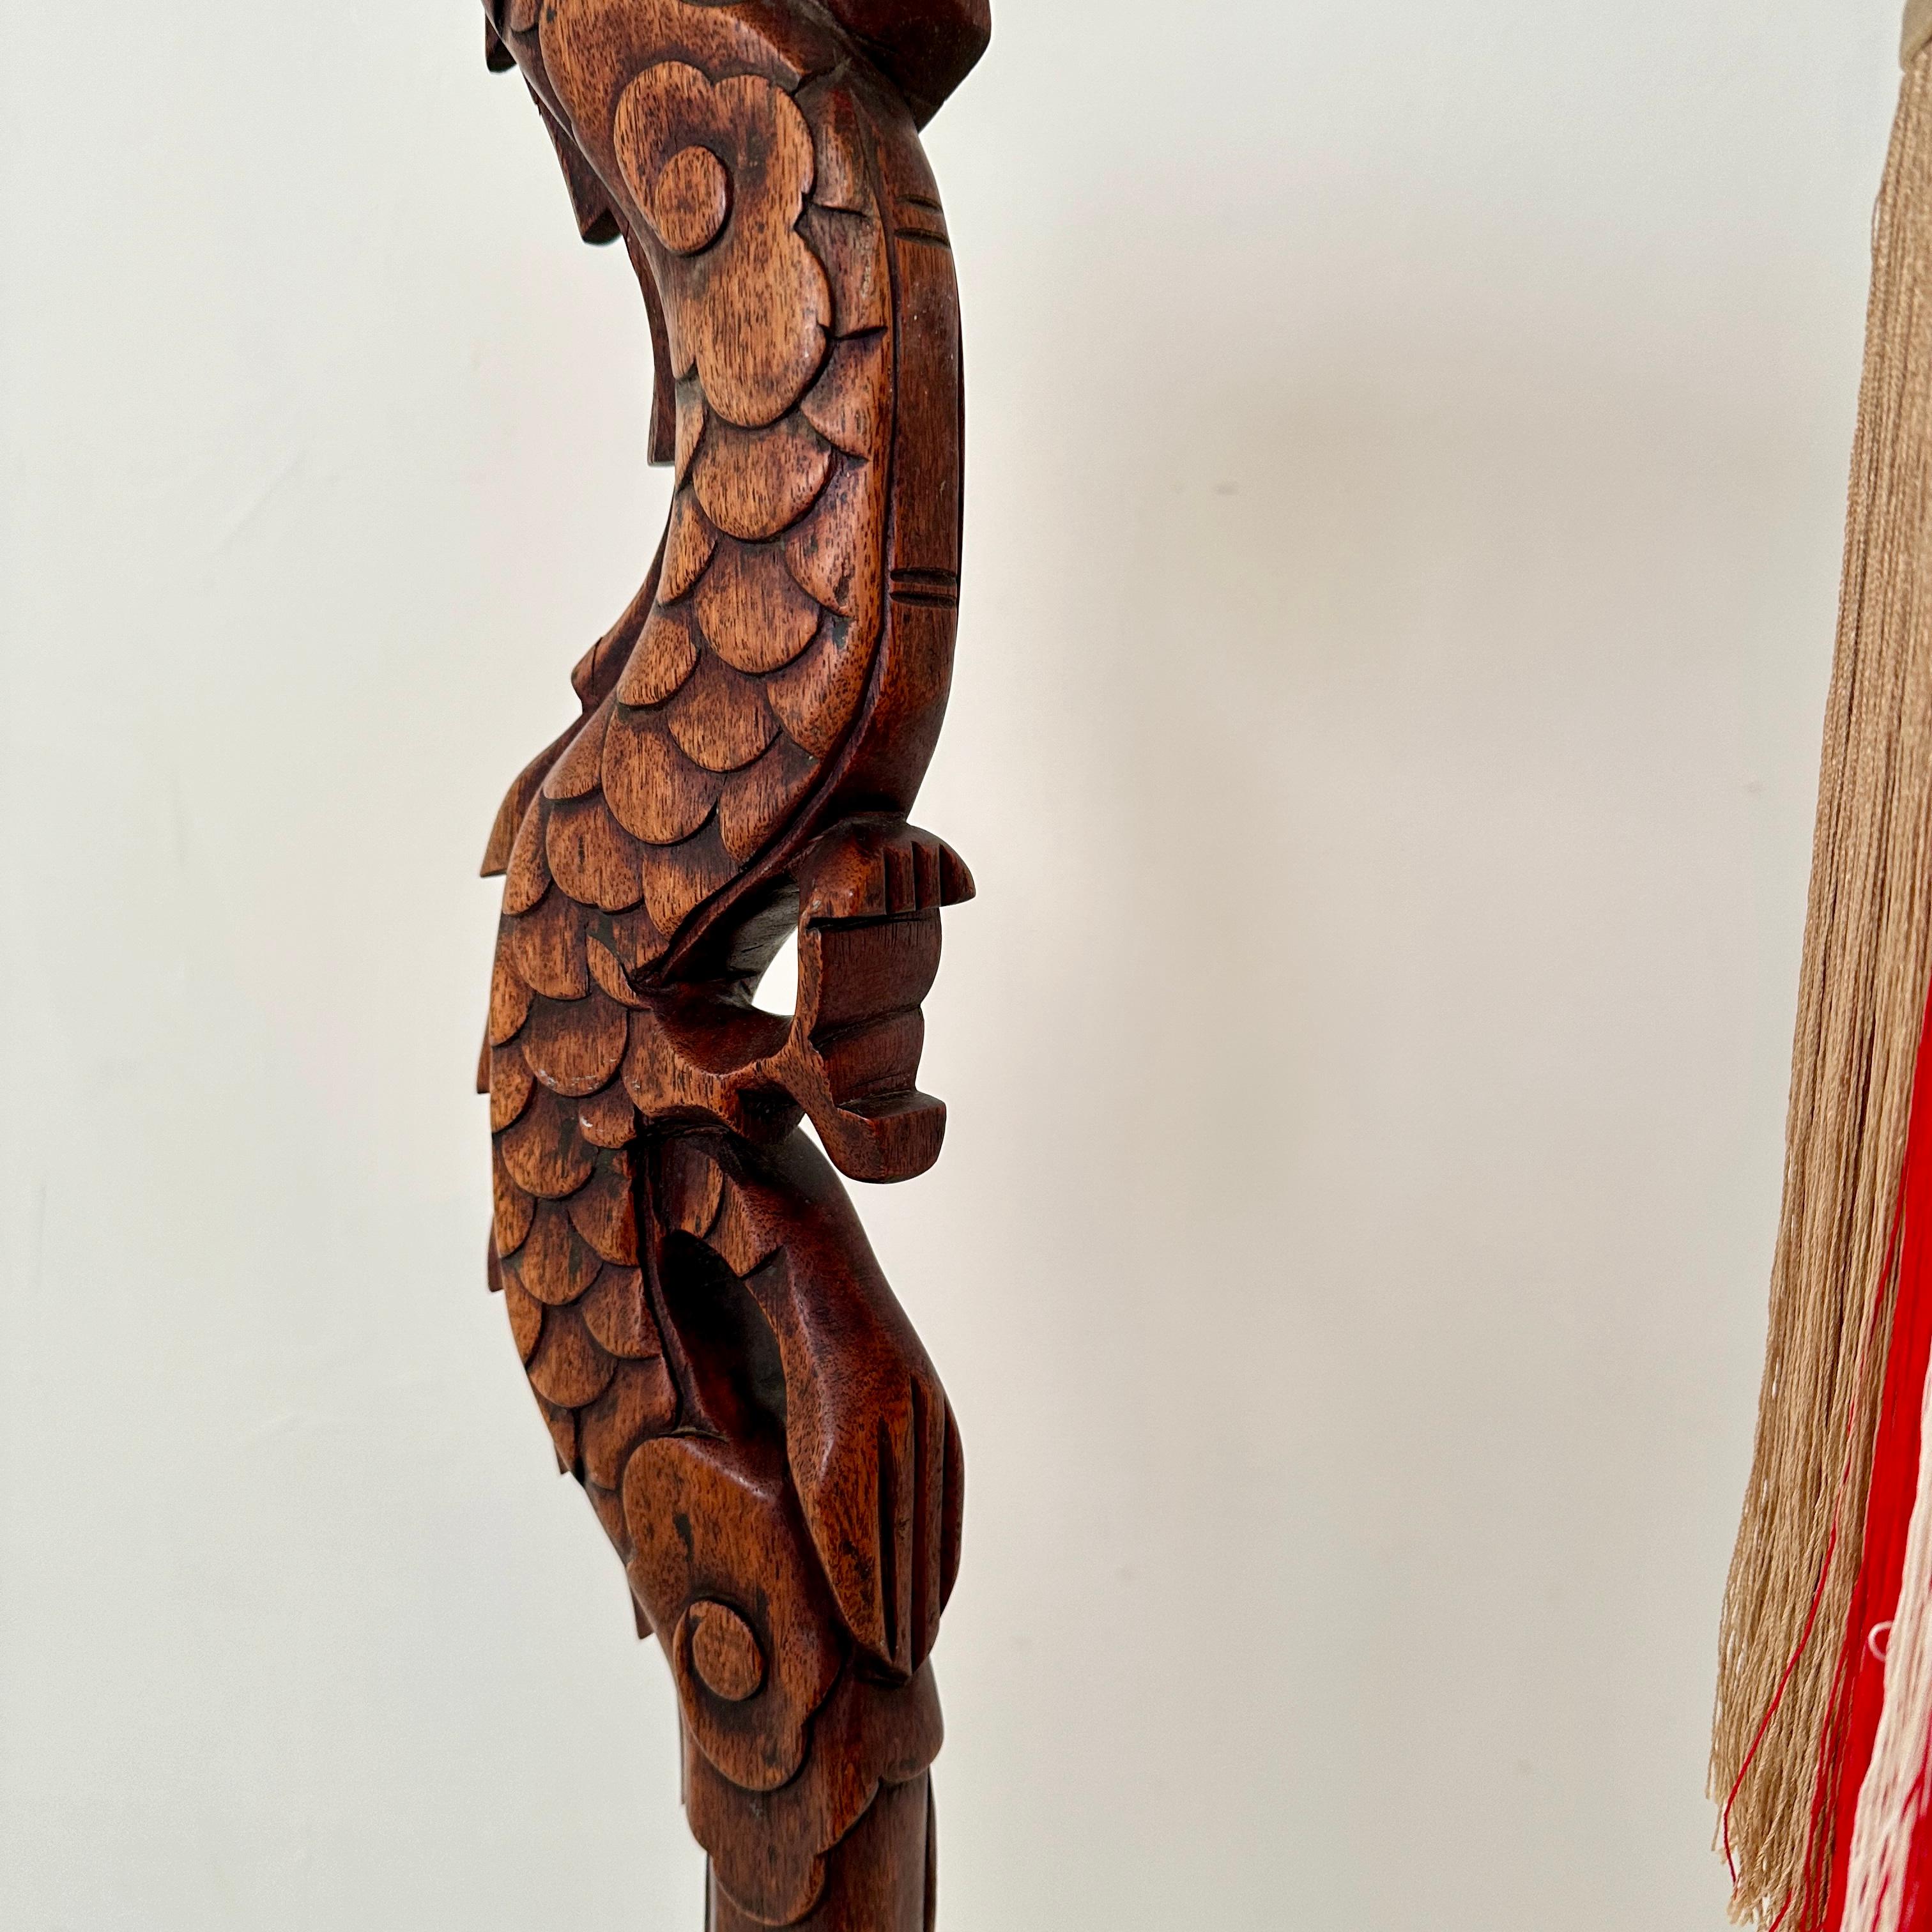 German Art Deco Floor Lamp in the Shape of a Dragon, carved with lampshade, 1920 For Sale 4